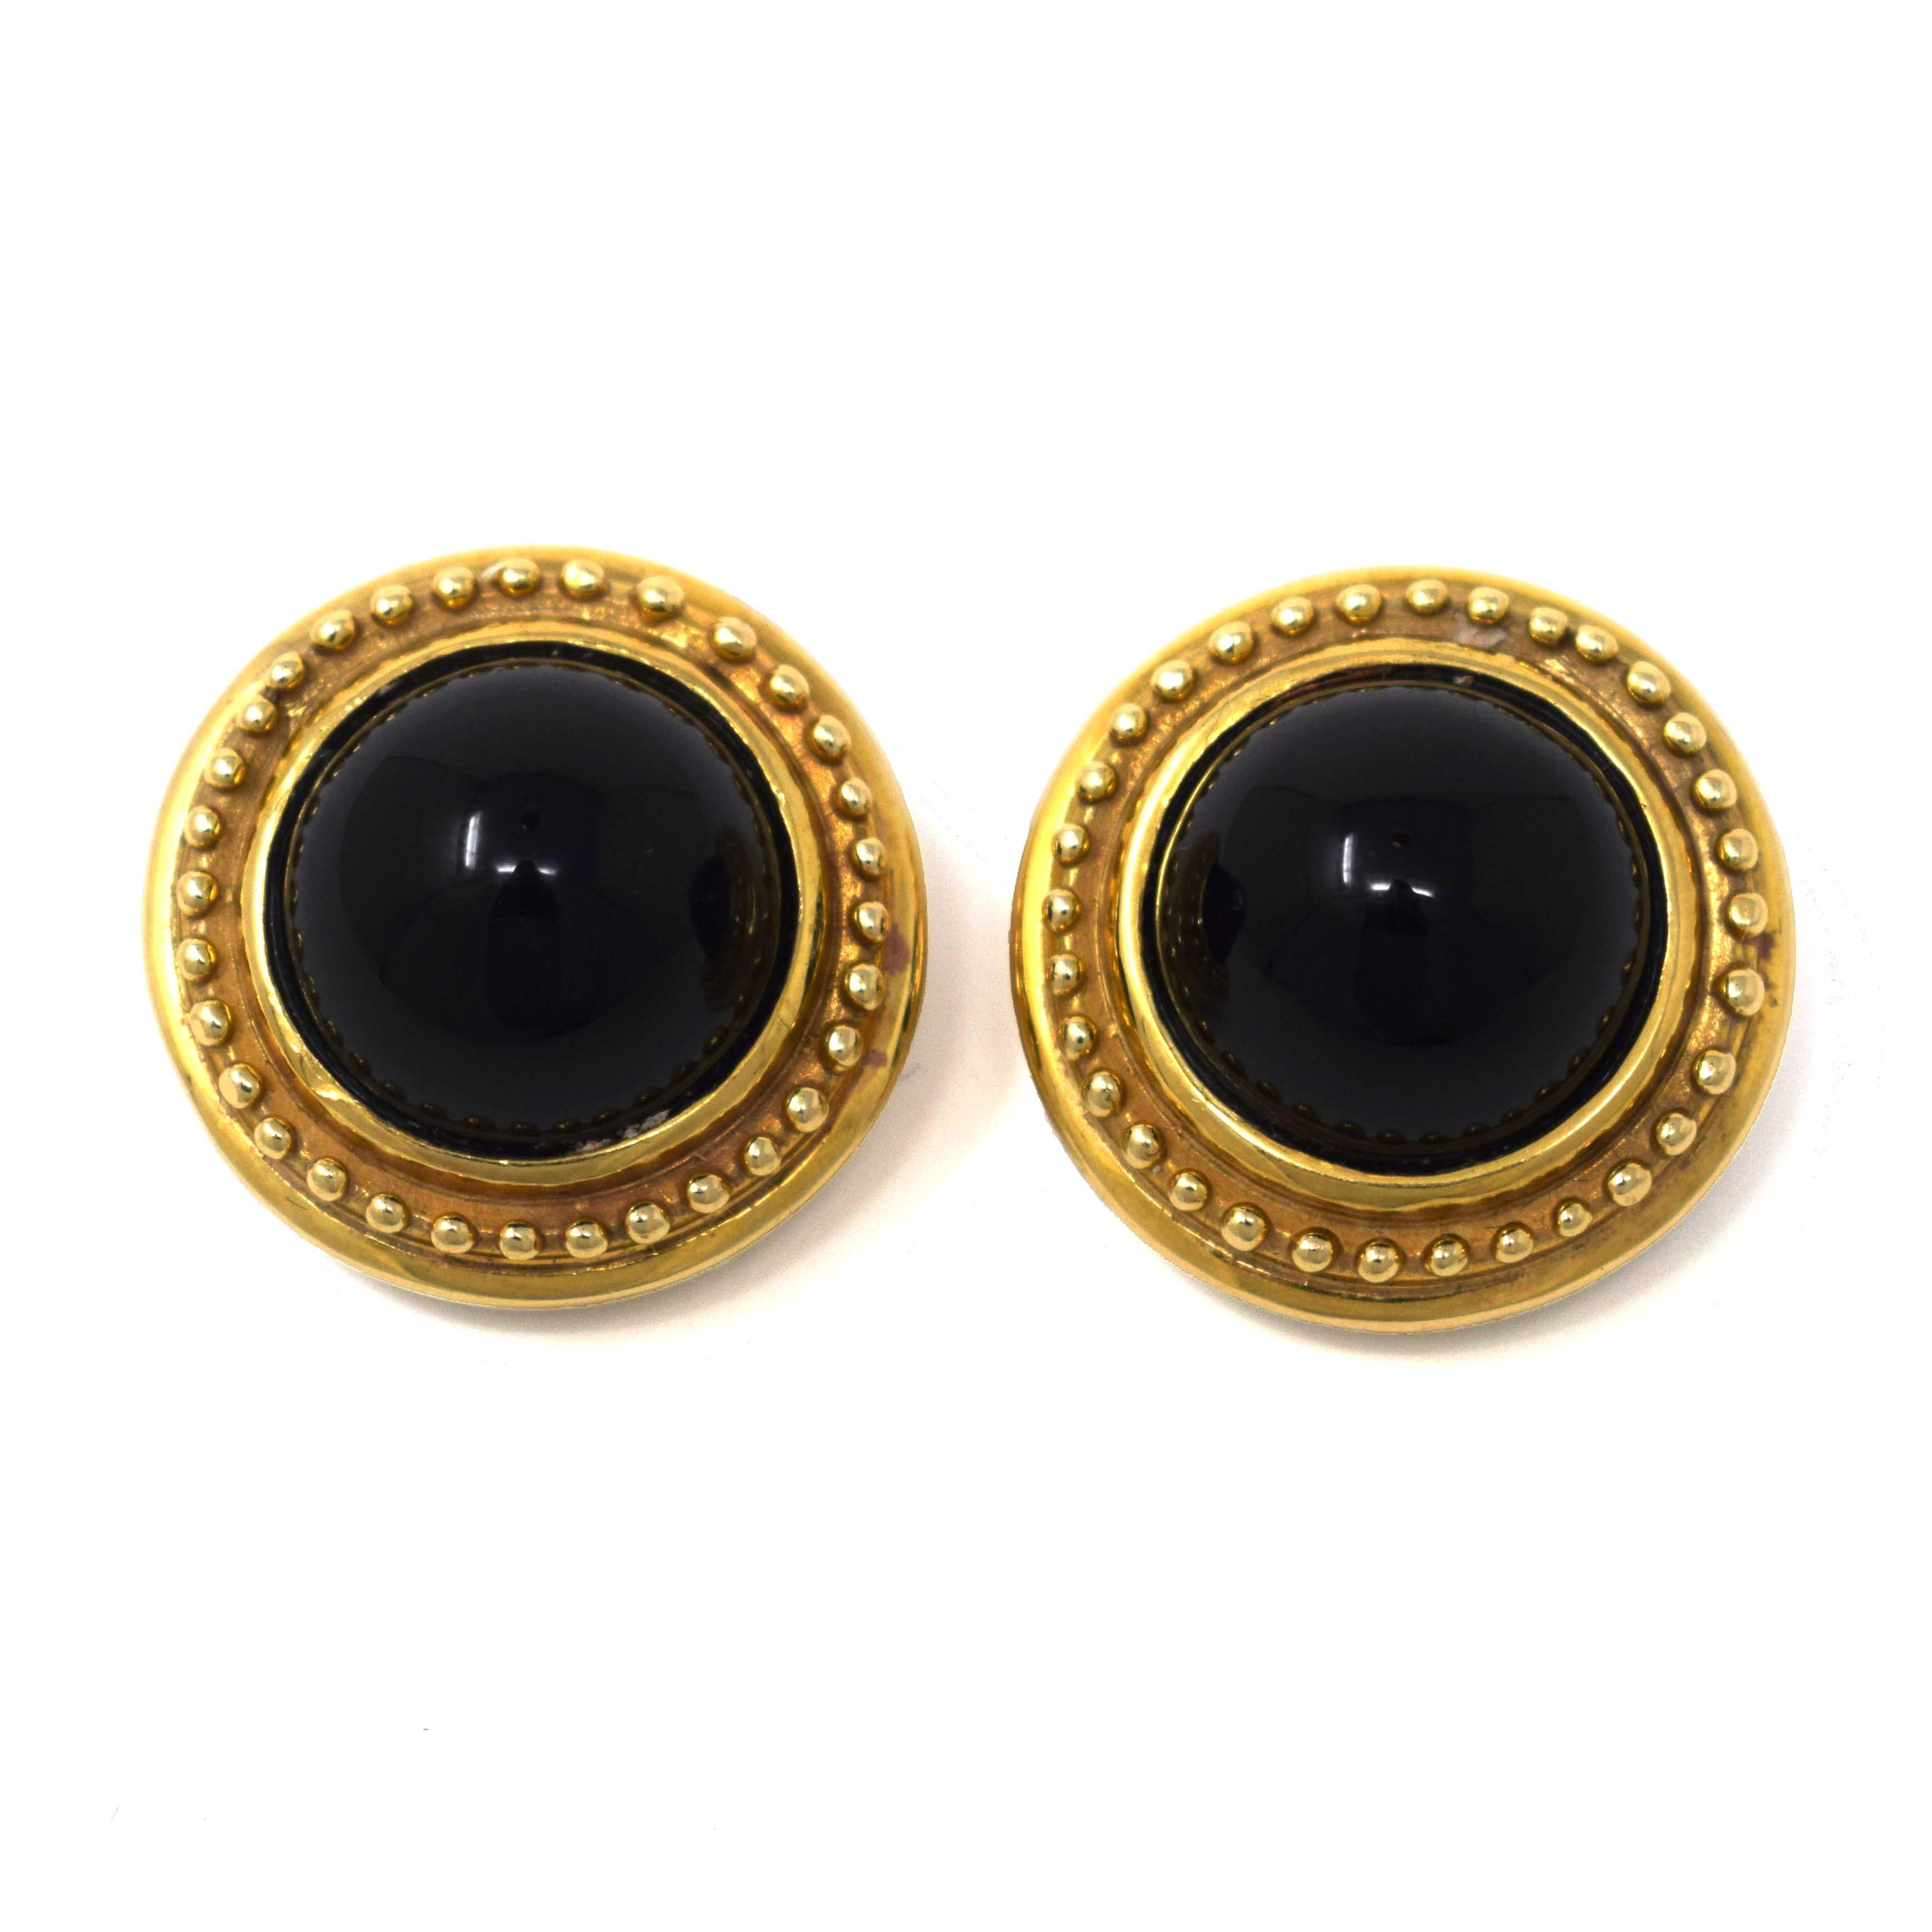 Brilliance Jewels, Miami
Questions? Call Us Anytime!
786,482,8100

Style: Cocktail Large Round Earrings

Metal: Yellow Gold

Metal Purity: 14k

Stones: 2 Cabochon Black Onyx

Onyx Diameter: 15.6 mm

Total Item Weight (grams): 28.8

Earring Diameter: